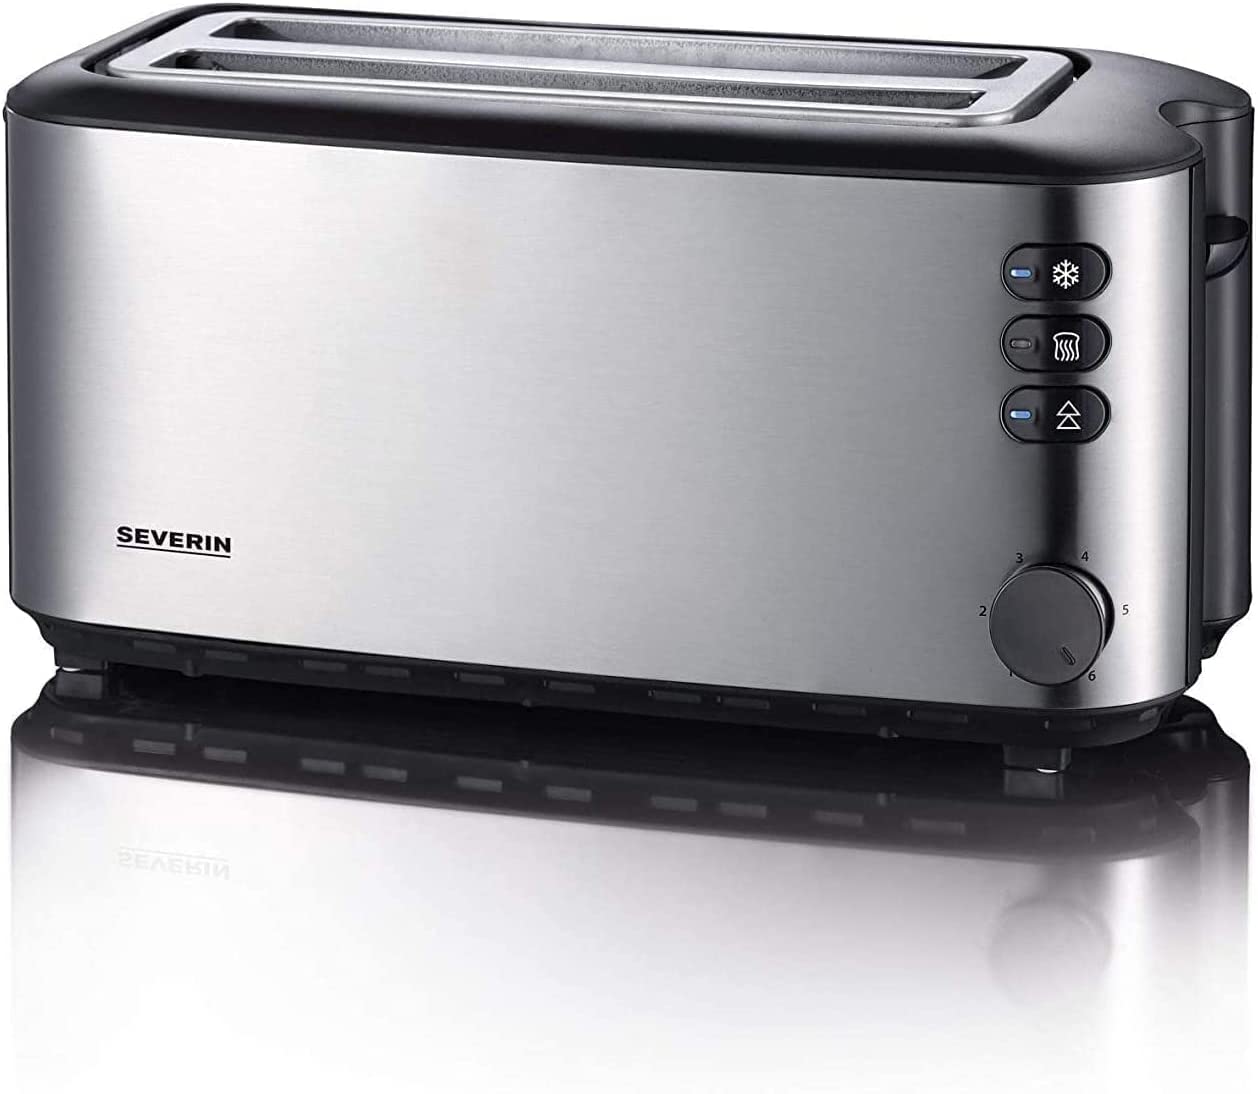 SEVERIN Automatic long-slot toaster